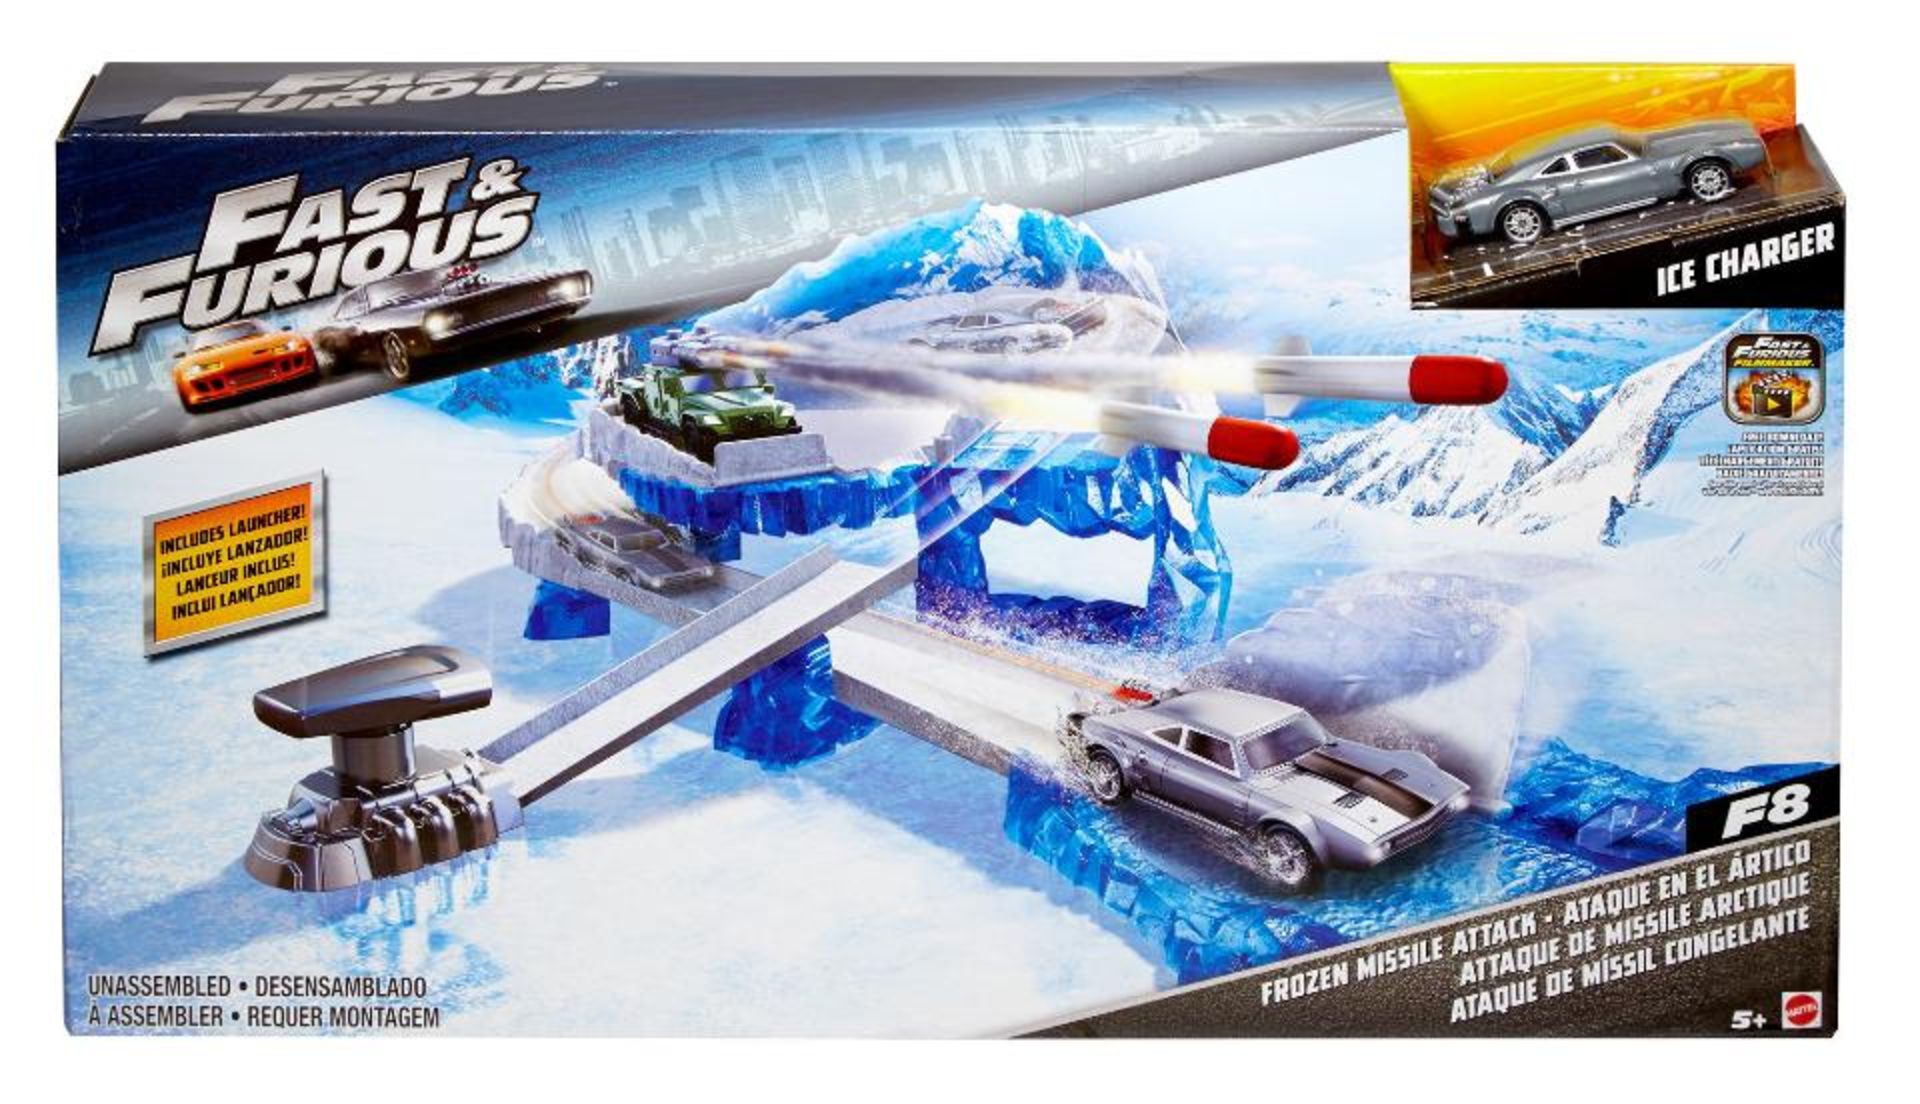 V Brand New Fast and Furious Frozen Missile Attack - Car Styles May Vary - Online Price £28.33